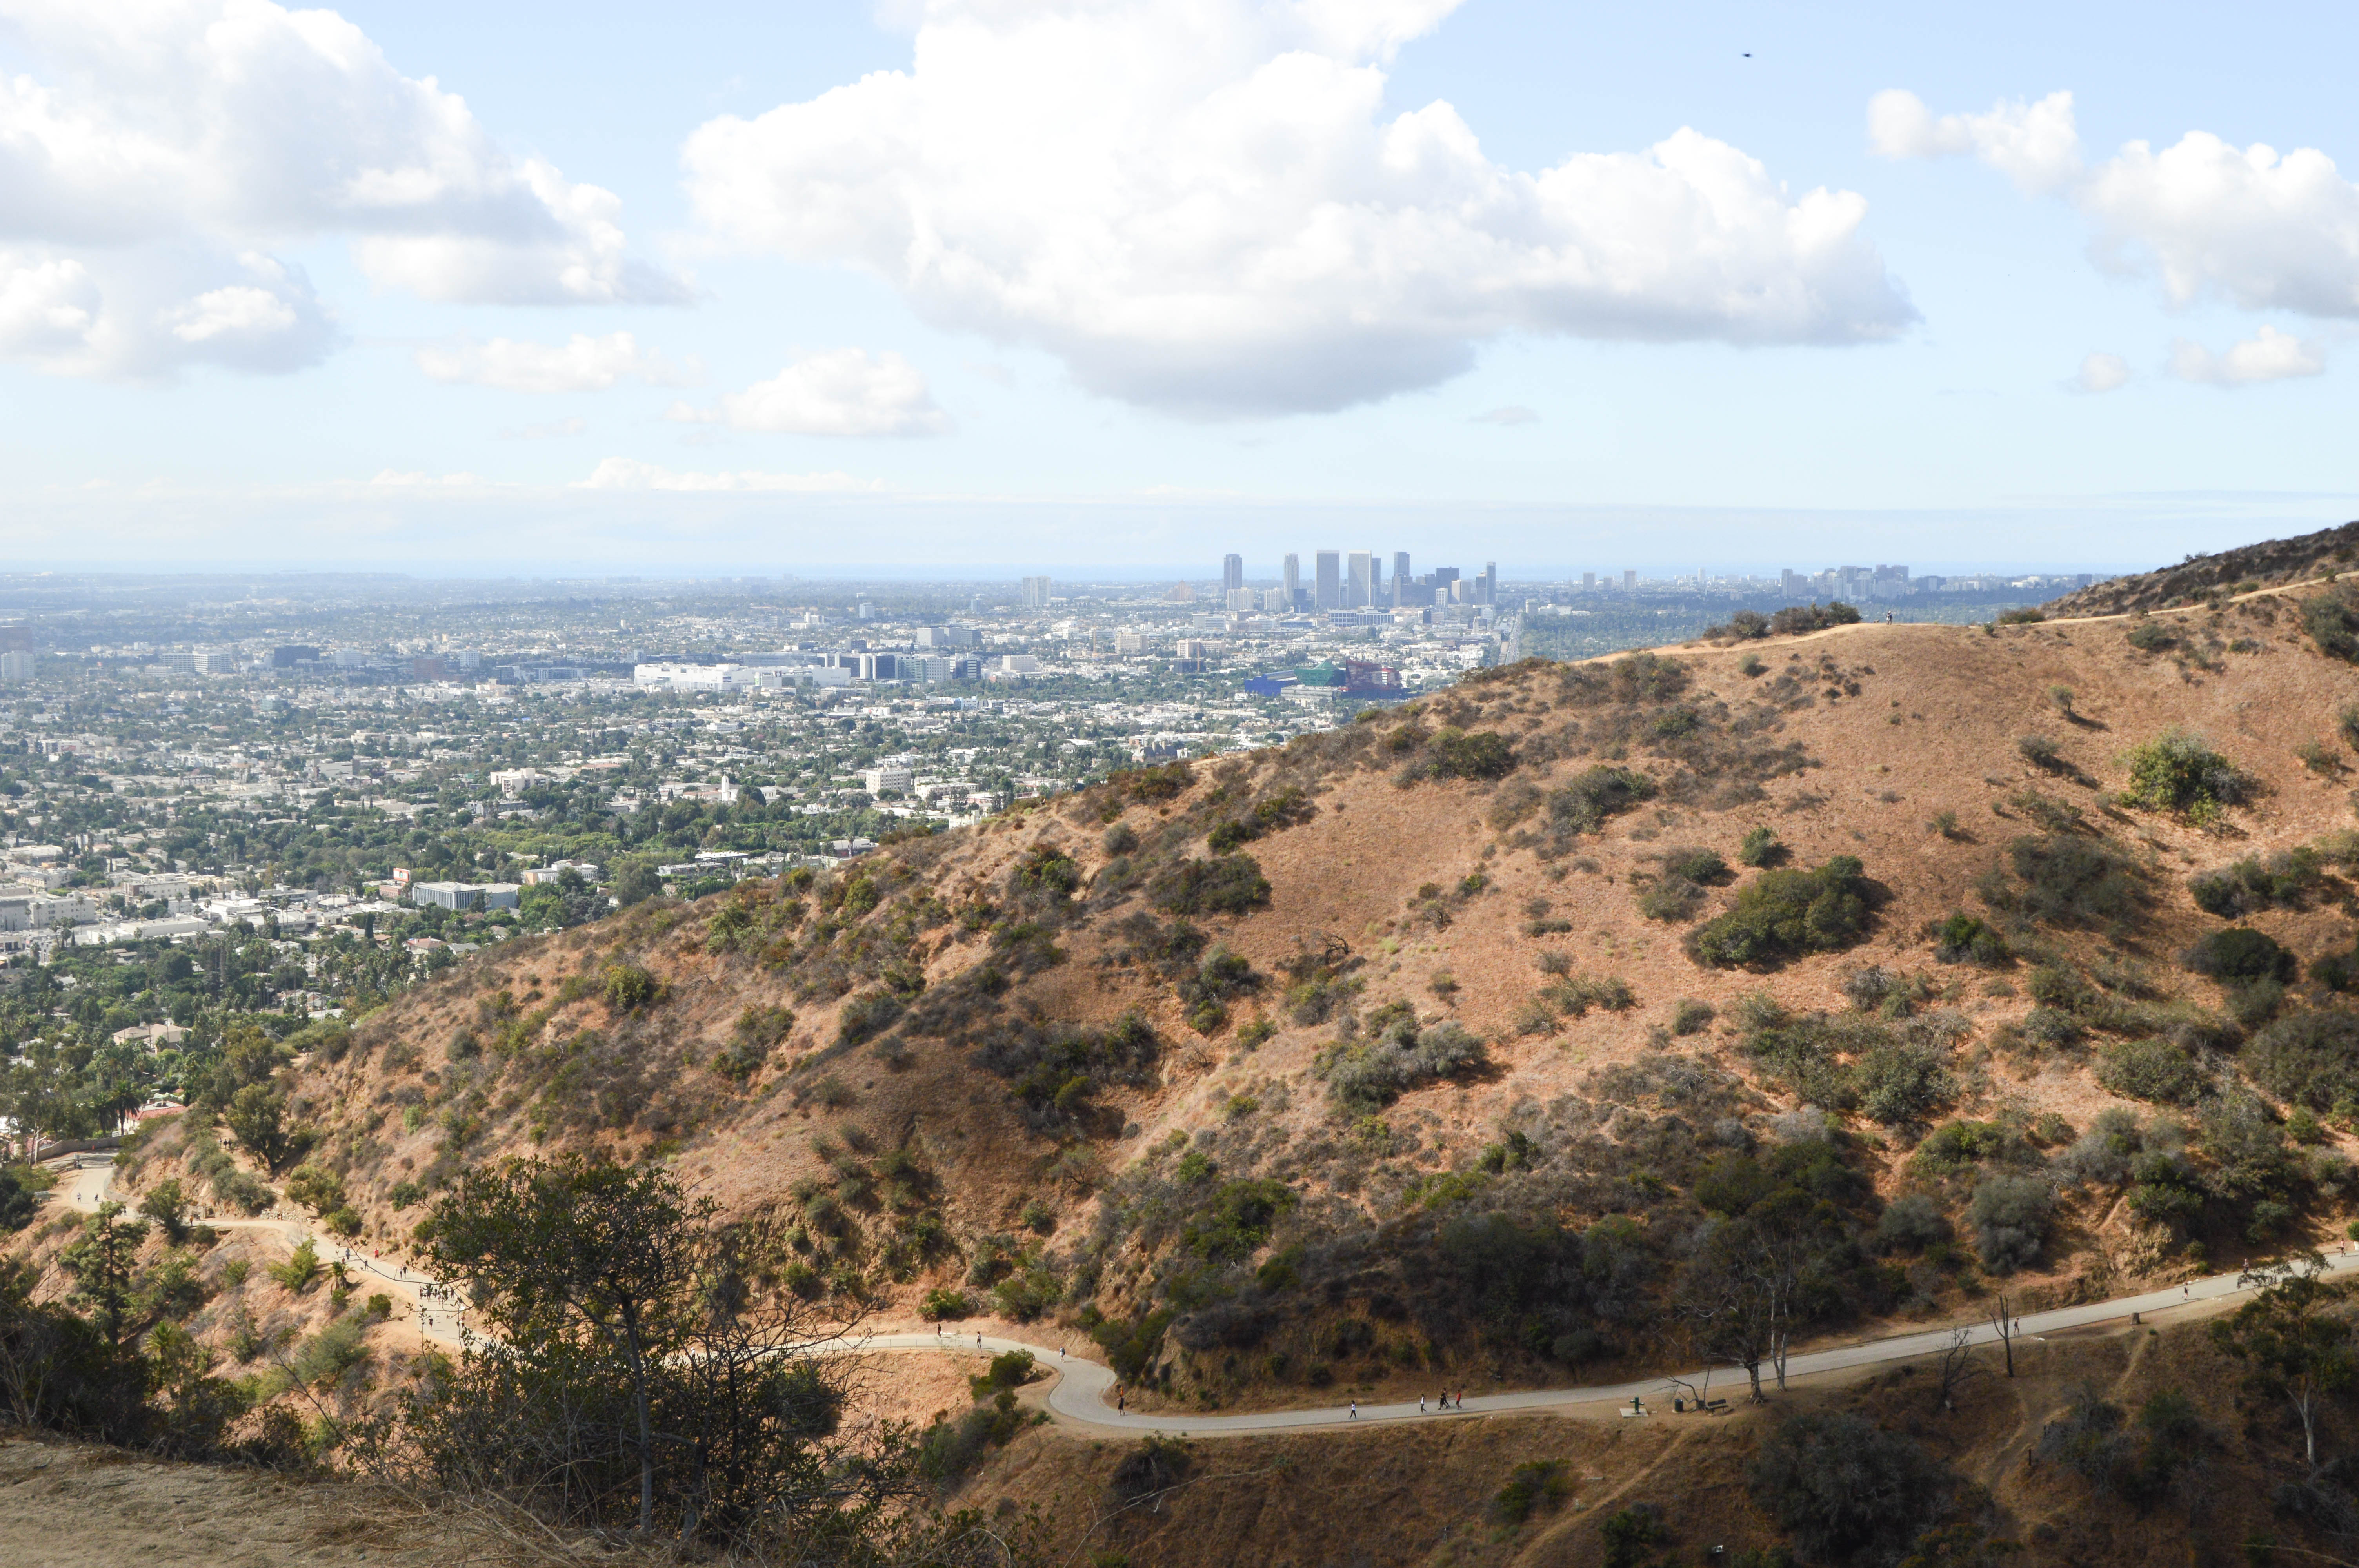 4 Things To Do In LA